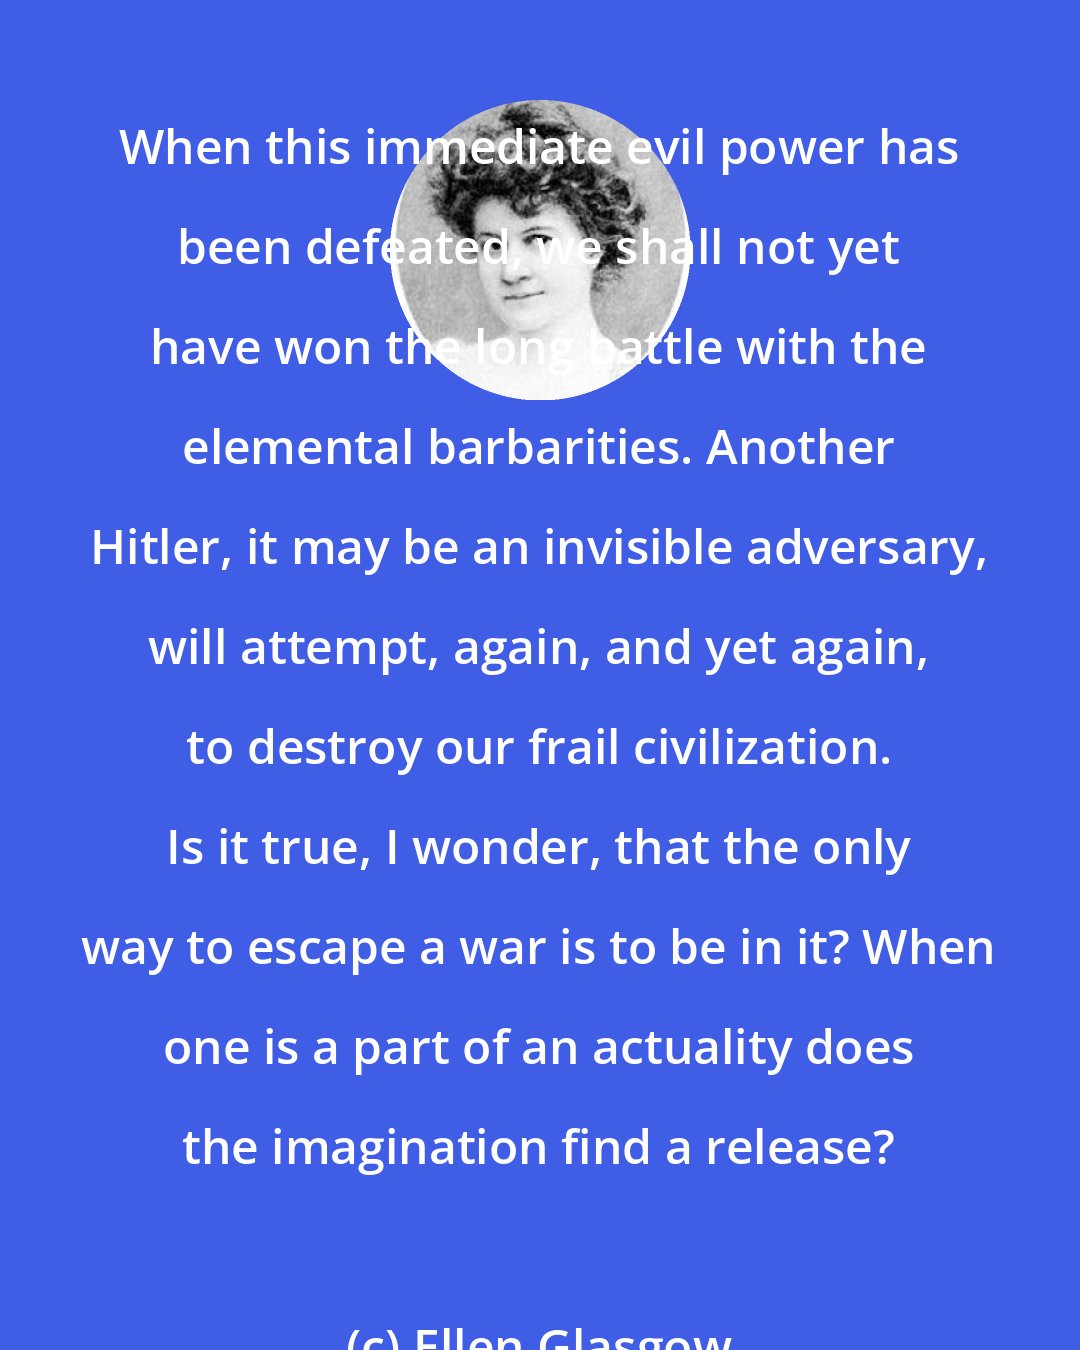 Ellen Glasgow: When this immediate evil power has been defeated, we shall not yet have won the long battle with the elemental barbarities. Another Hitler, it may be an invisible adversary, will attempt, again, and yet again, to destroy our frail civilization. Is it true, I wonder, that the only way to escape a war is to be in it? When one is a part of an actuality does the imagination find a release?